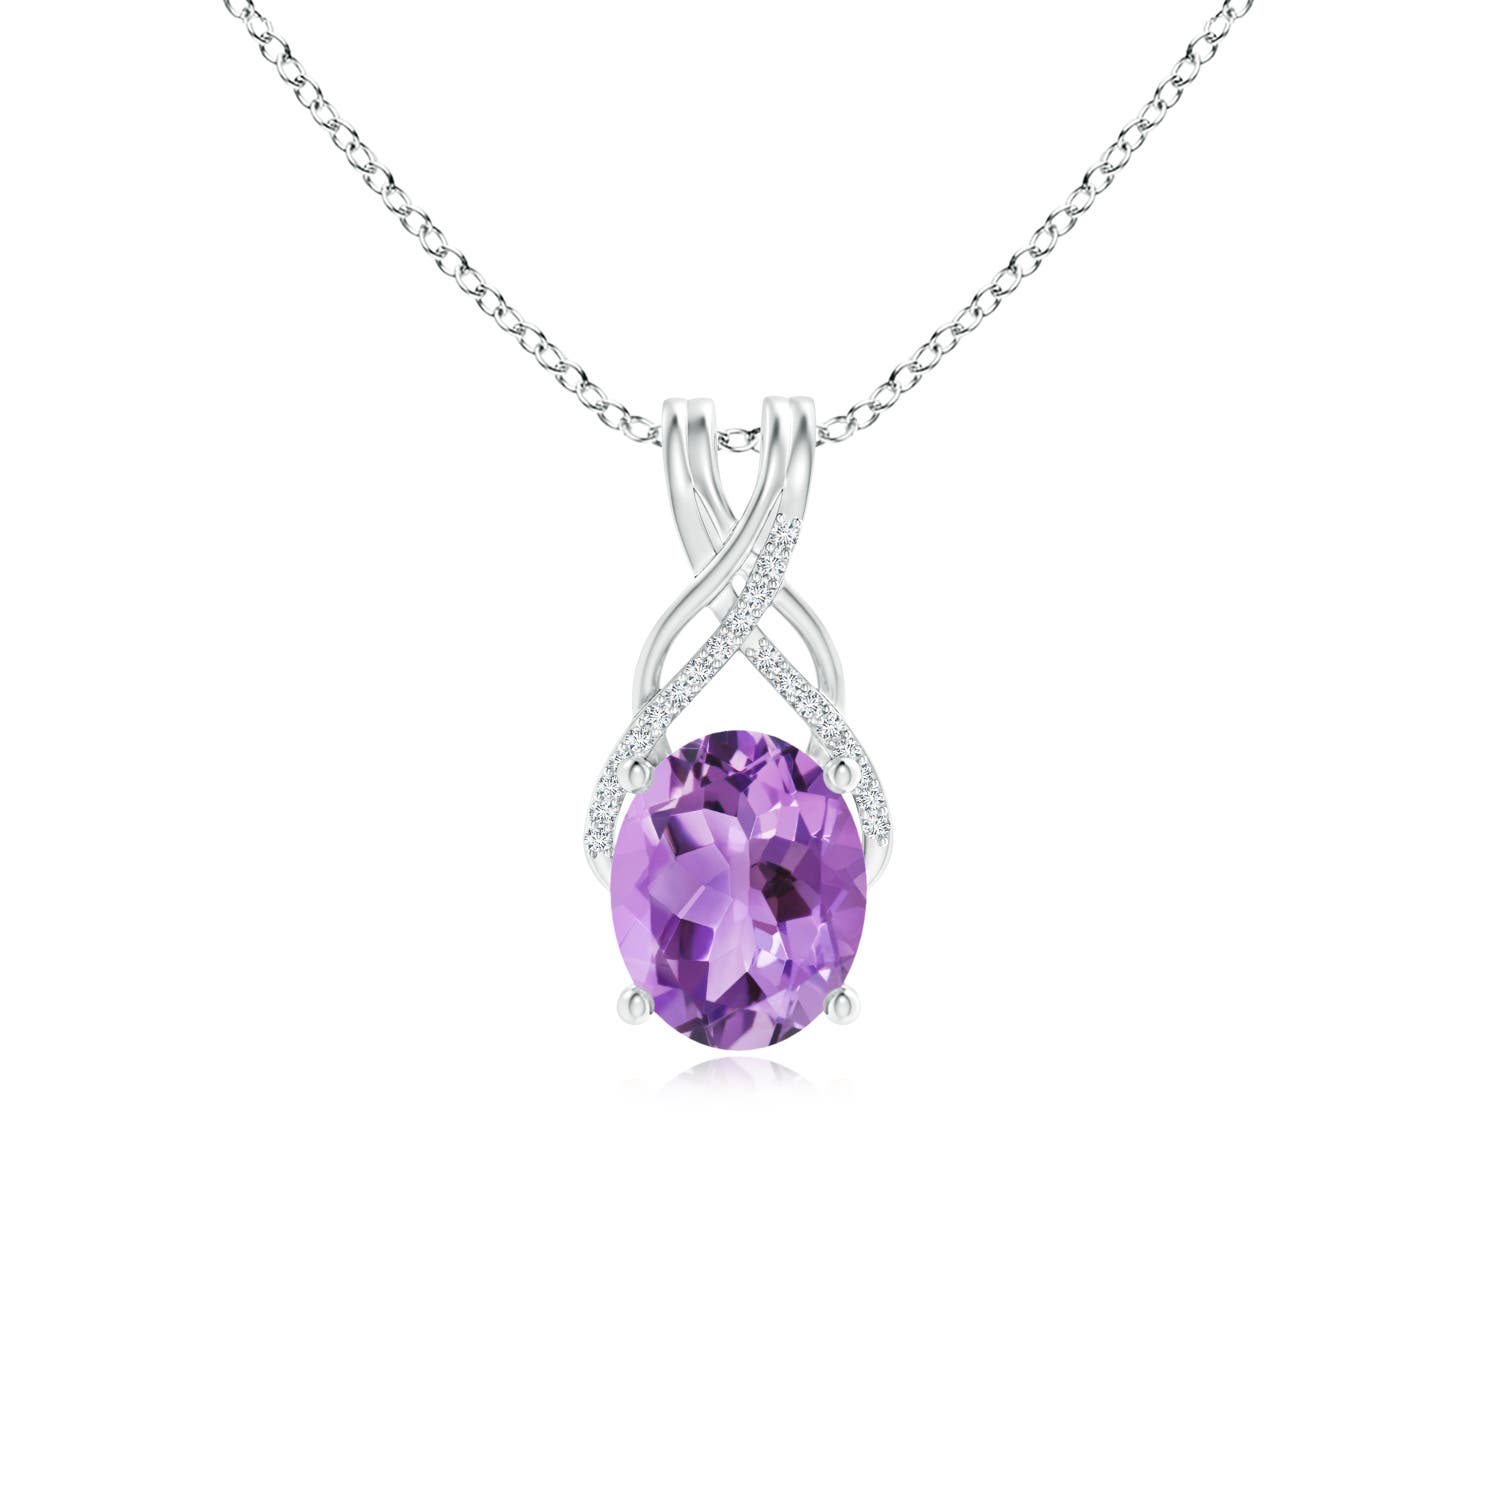 A - Amethyst / 2.35 CT / 14 KT White Gold